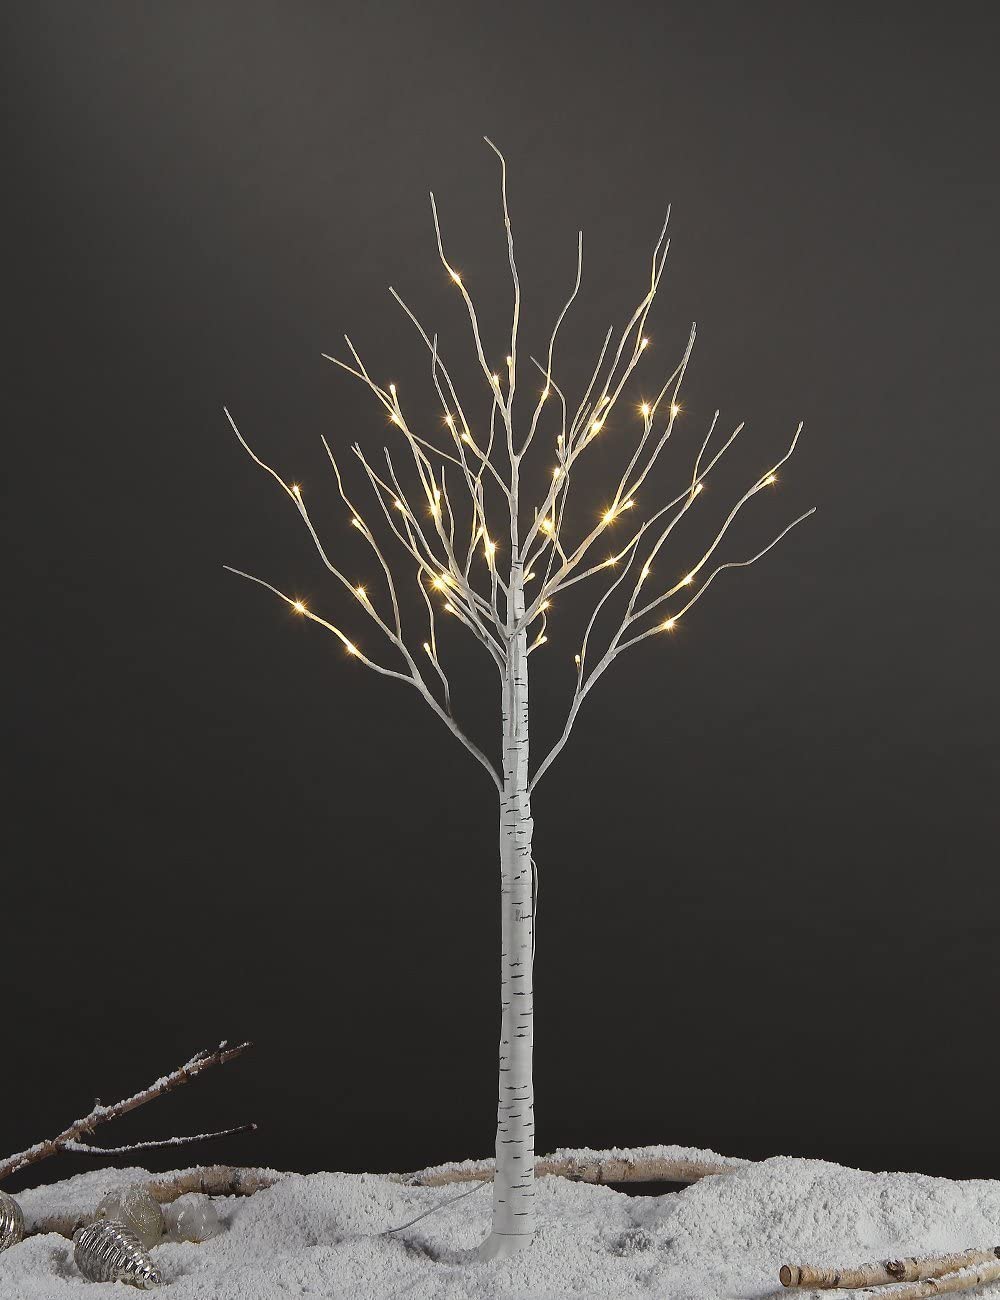 4ft Lighted Birch Tree 48 LED Artificial Tree for Decoration Inside and Outside , Home Patio Wedding Festival Christmas Decor , Warm White